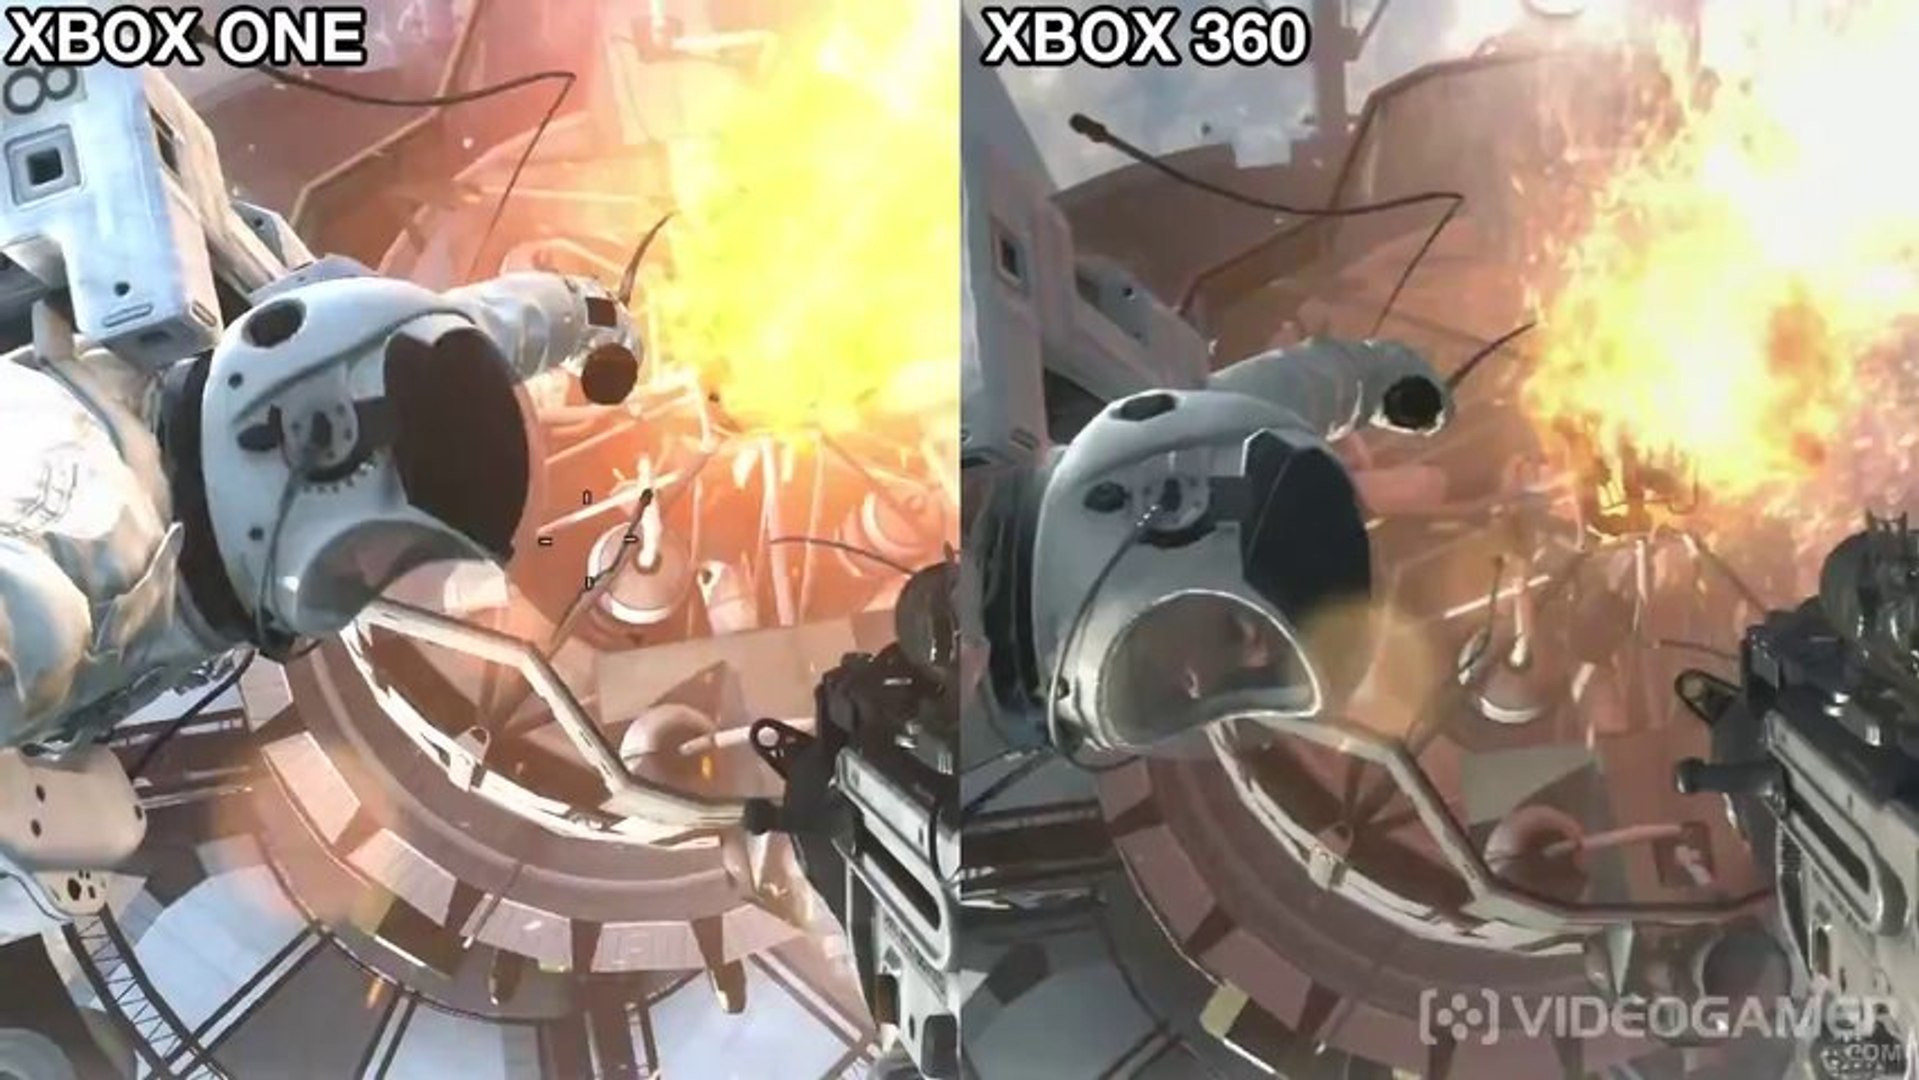 Vluchtig echtgenoot Reisbureau Call of Duty : Ghosts - Xbox 360 and Xbox One Comparison - video Dailymotion